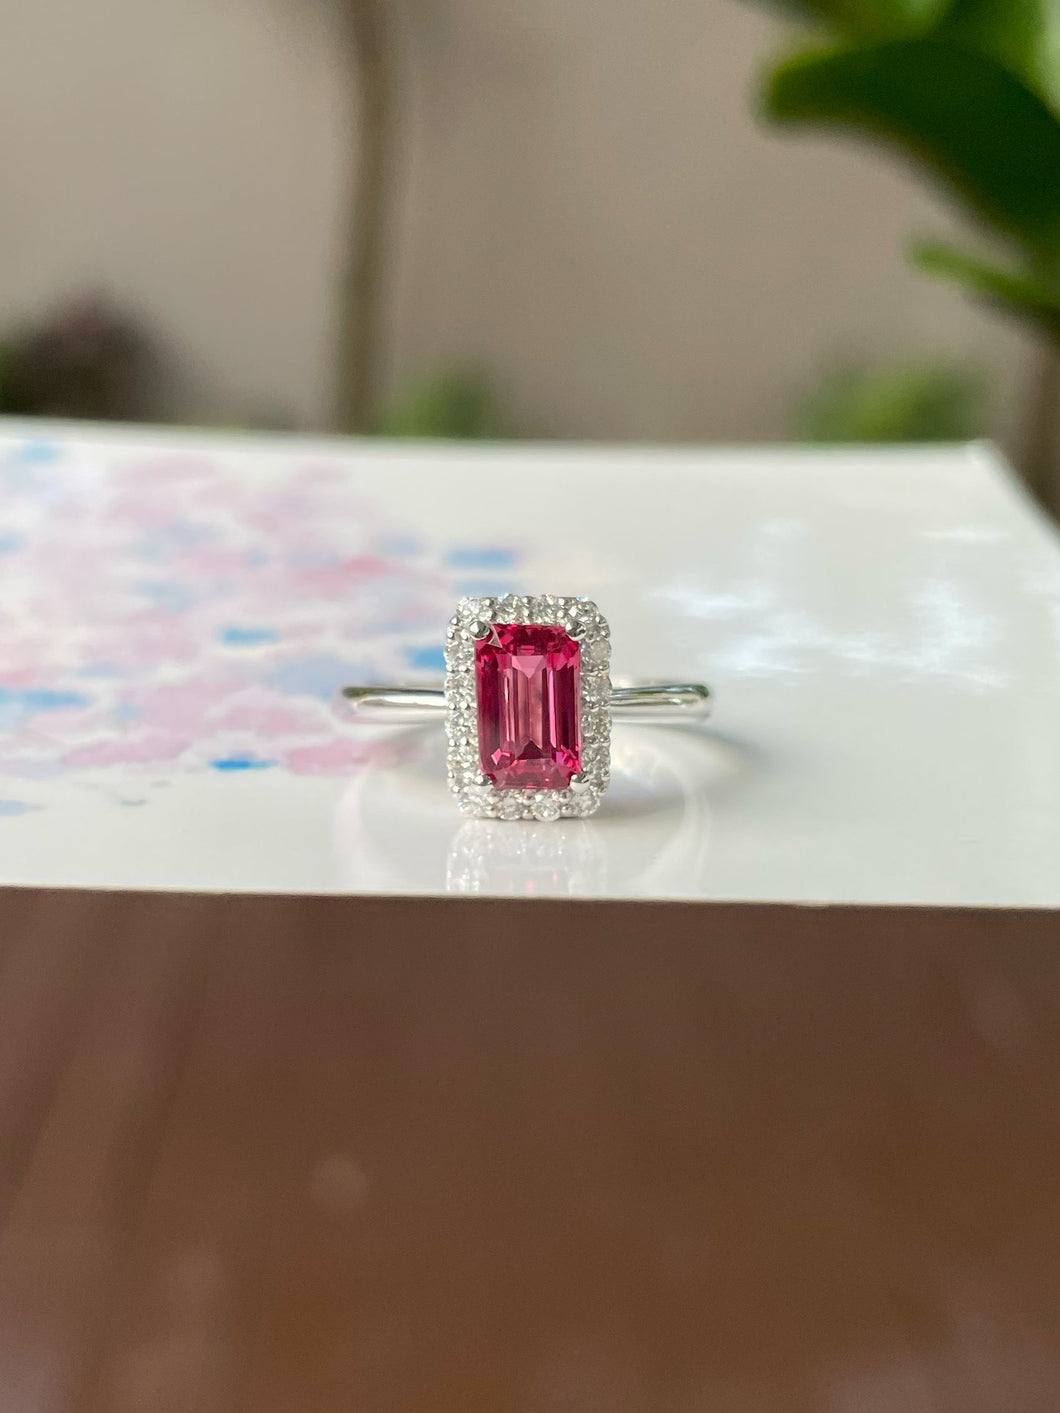 Pinkish Red Spinel Ring - 1.12CT (NJR209)